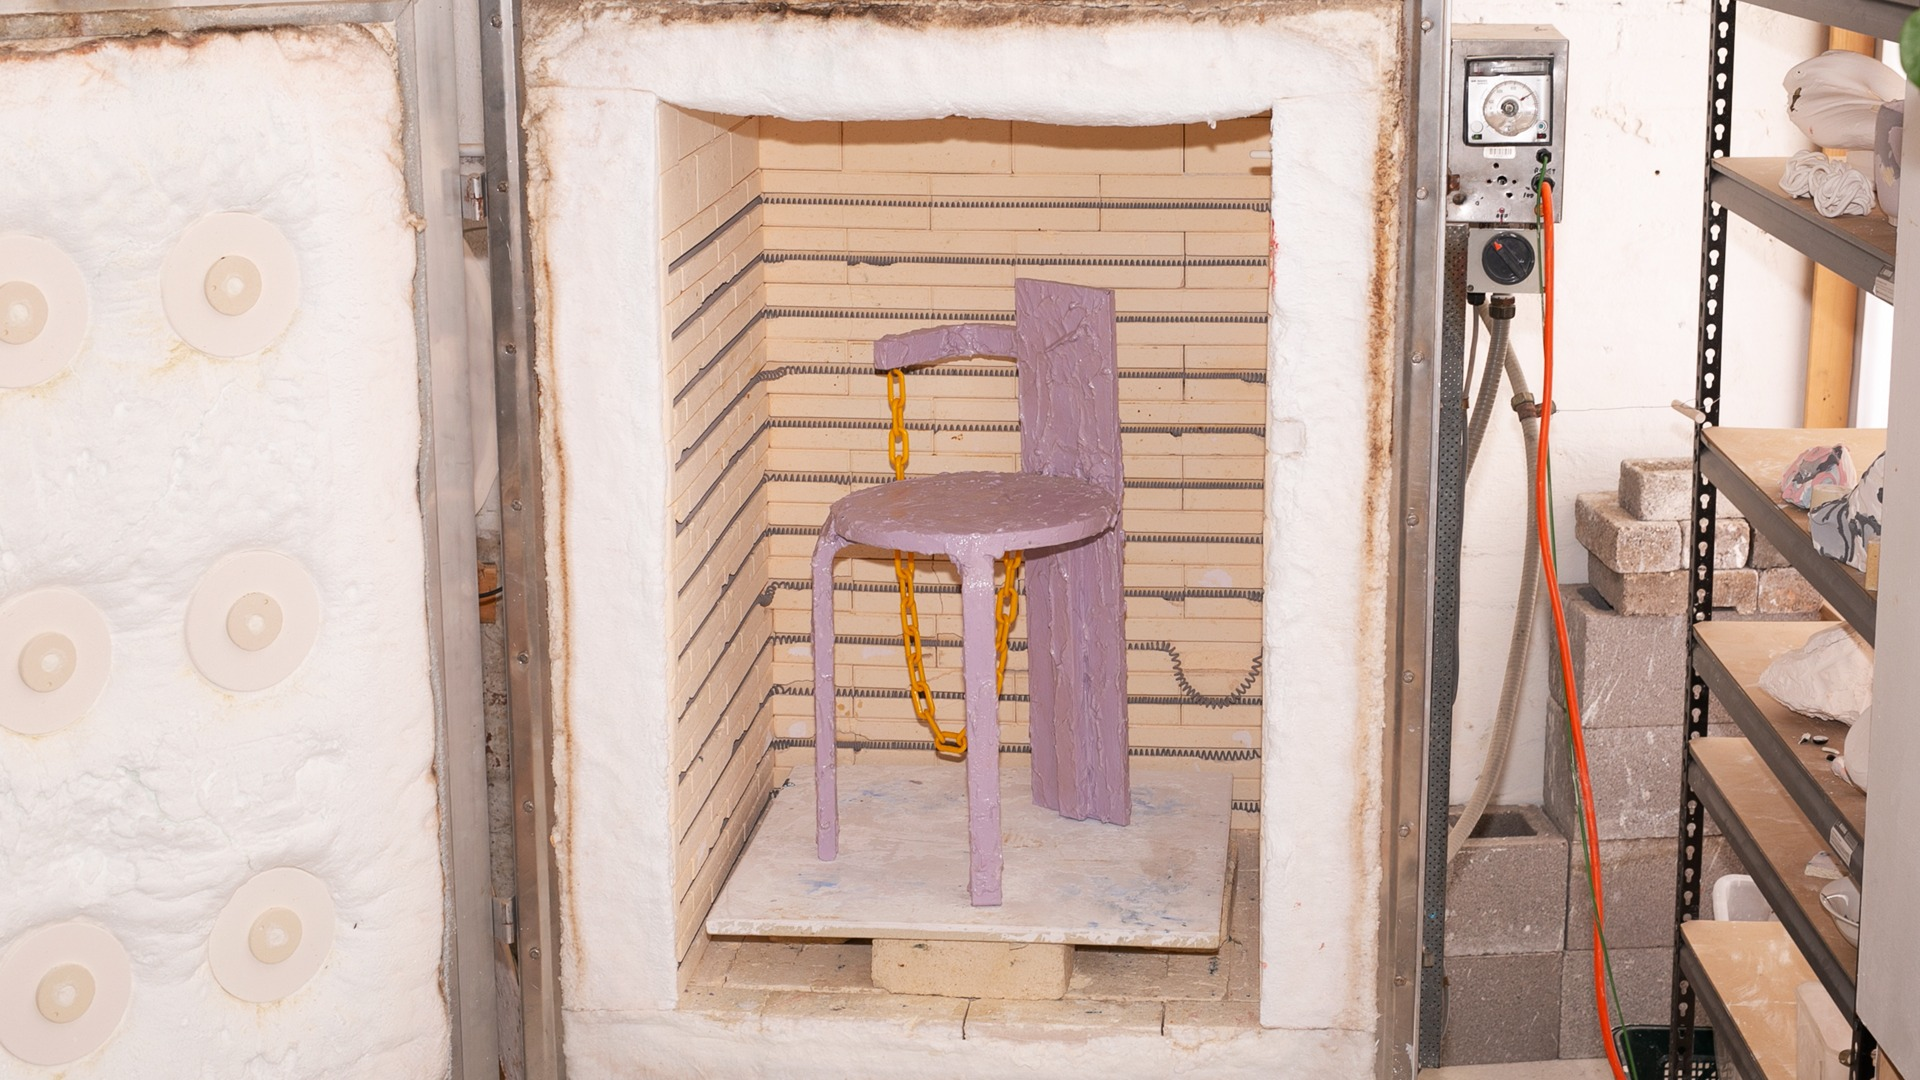 Photo of a kiln with an open door, inside the kiln is a lilac chair with a decorative orange chain.